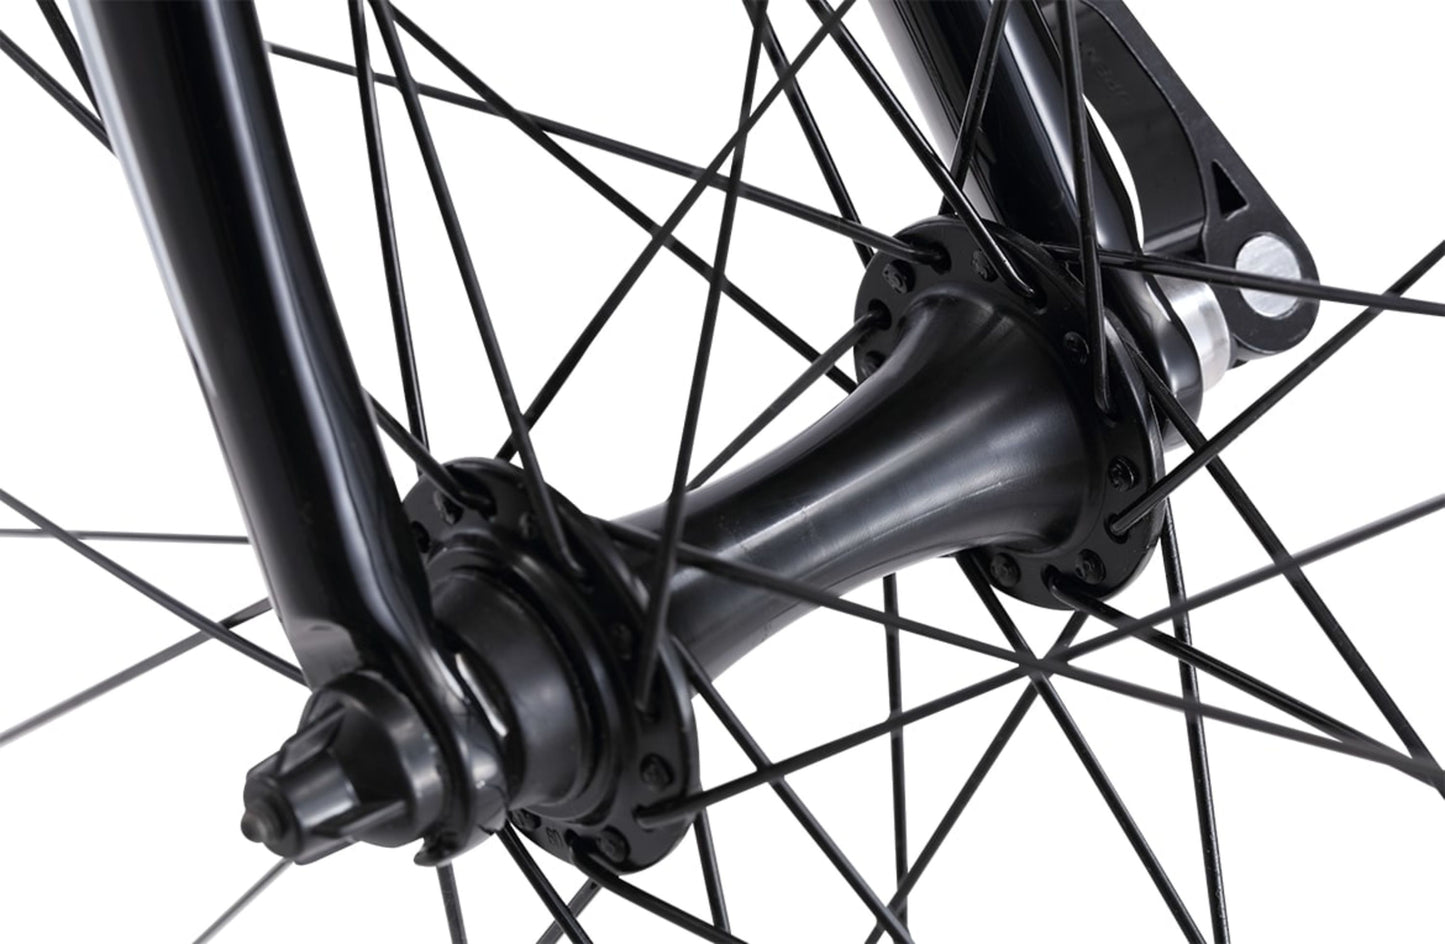 Osprey Flatbar Road Bike in Black showing Quando quick release front hub from Reid Cycles Australia 